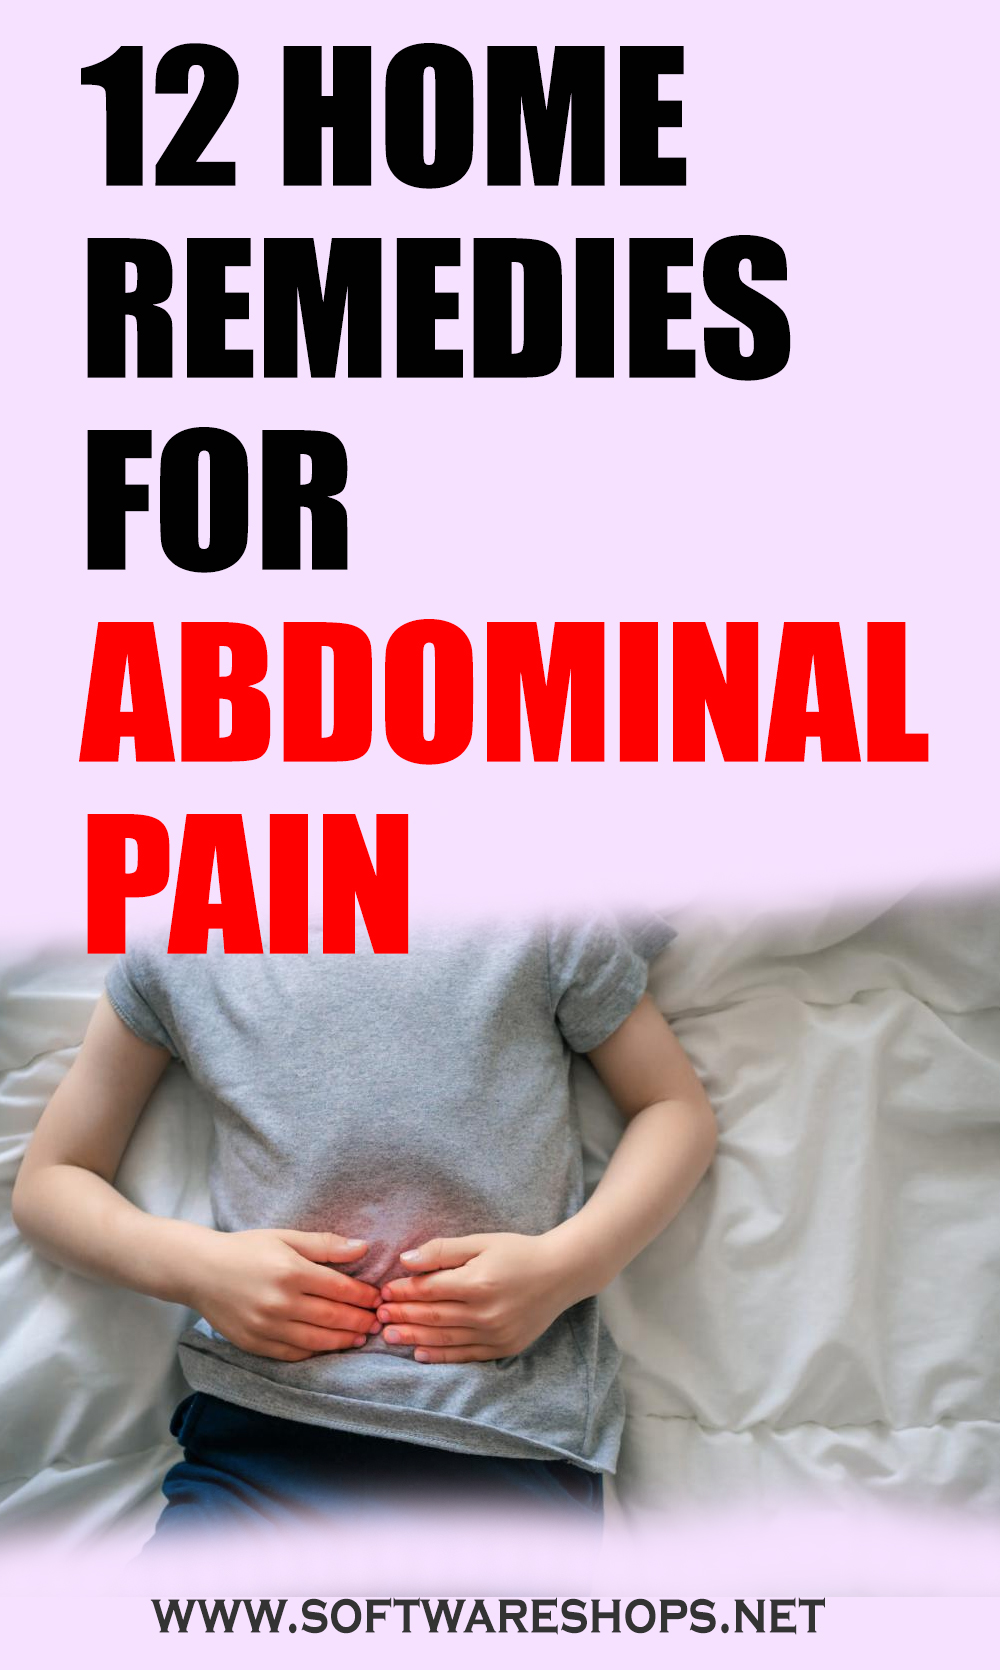 12 home remedies for abdominal pain